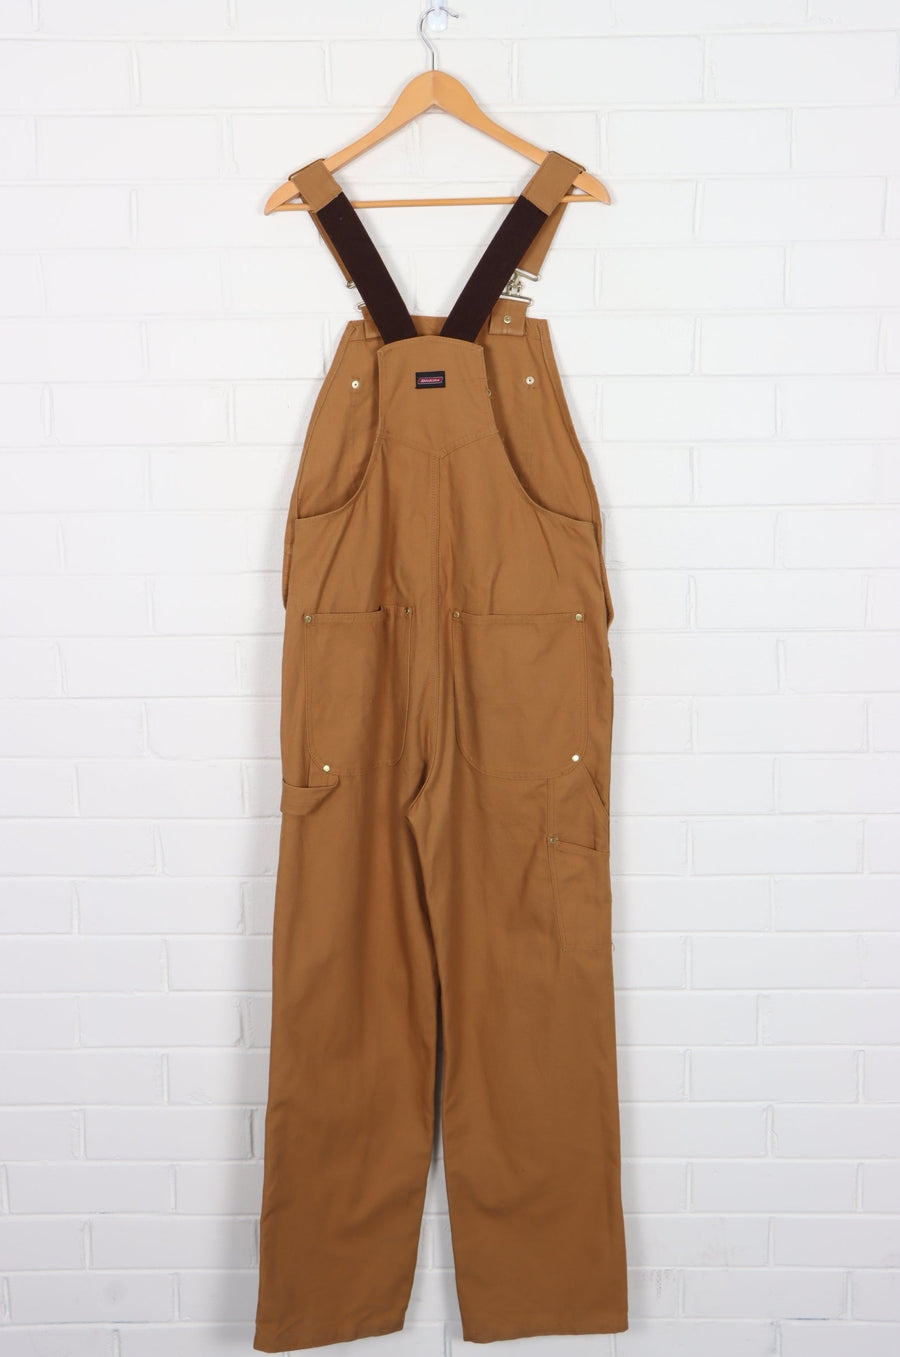 DICKIES Duck Canvas Long Workwear Overalls (M)